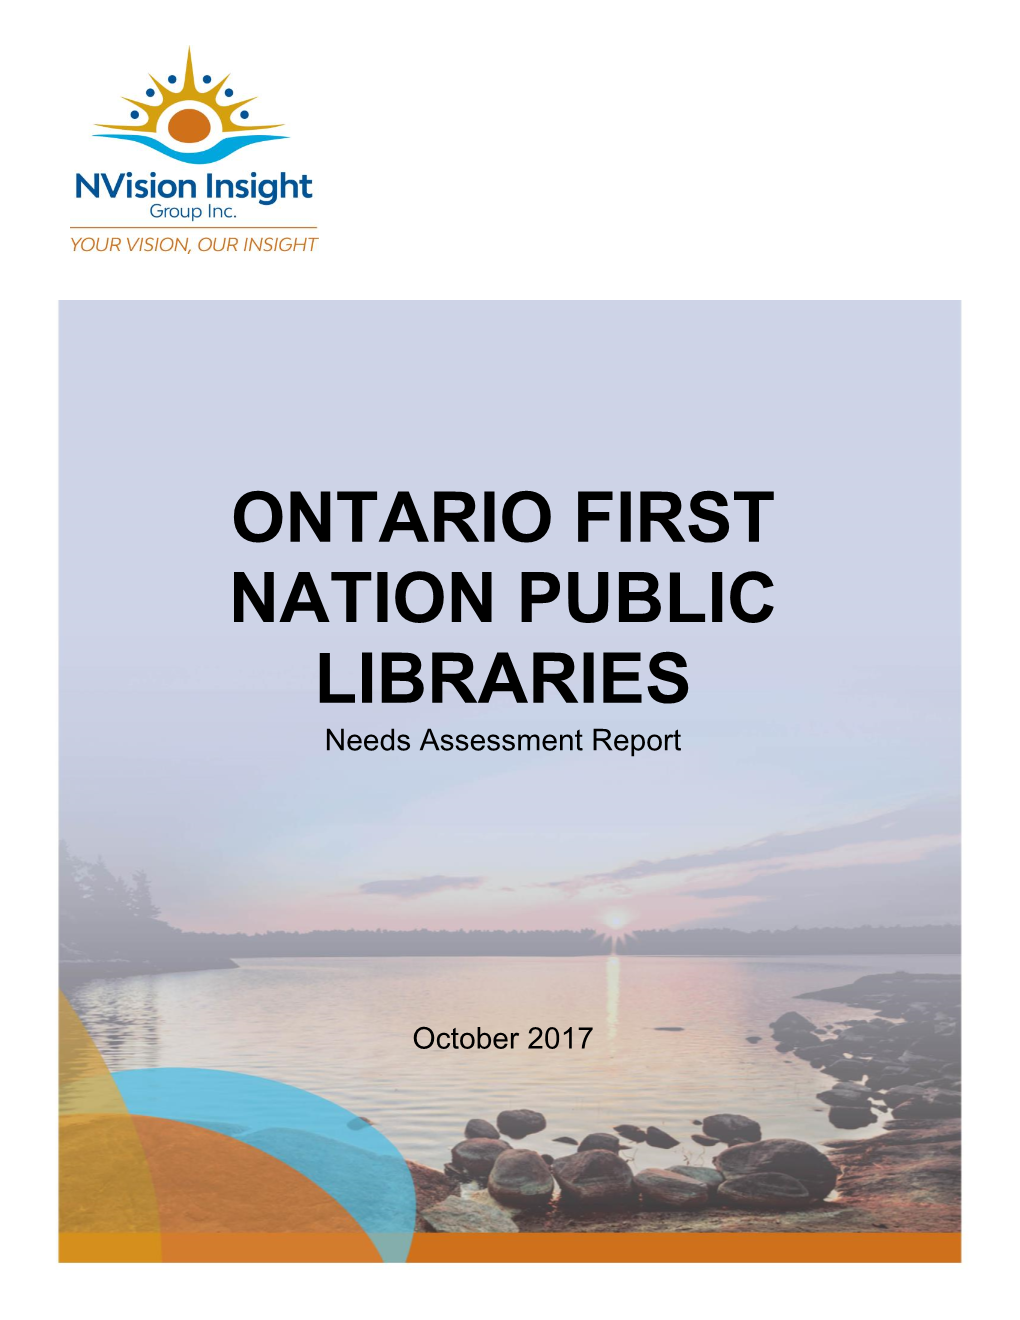 ONTARIO FIRST NATION PUBLIC LIBRARIES Needs Assessment Report